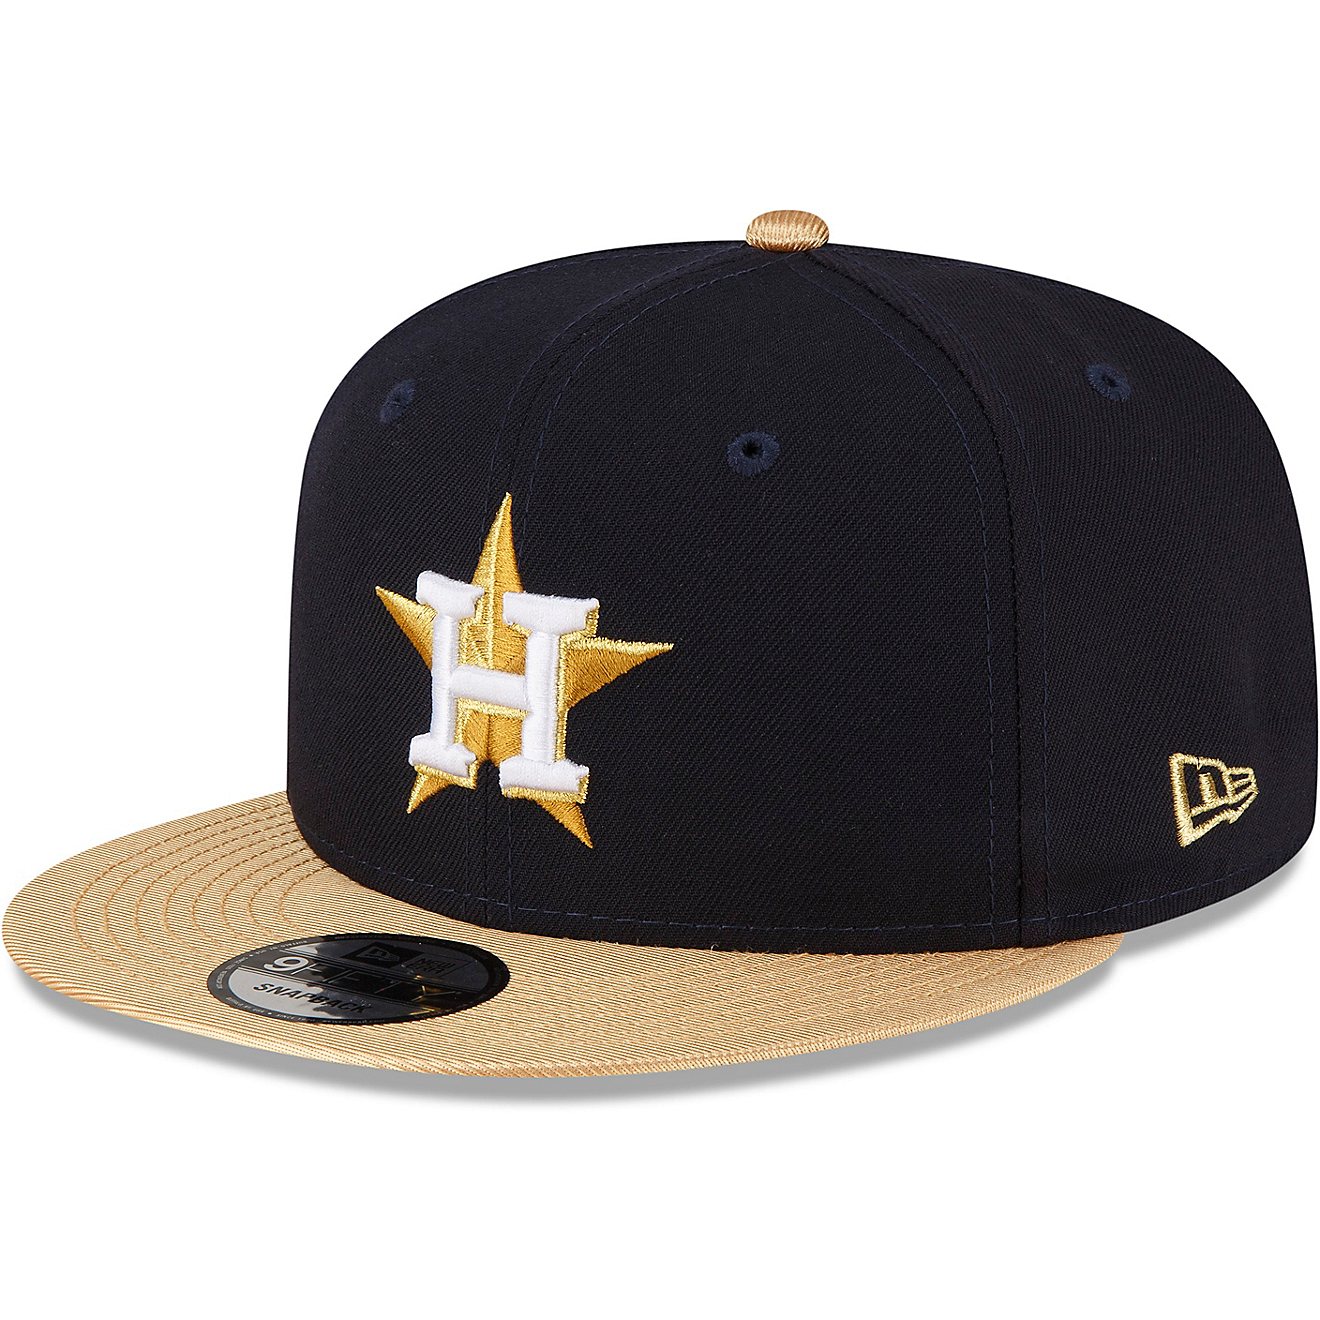 New Era Adults' Houston Astros 9FIFTY WS Champs Gold Collection Cap                                                              - view number 1